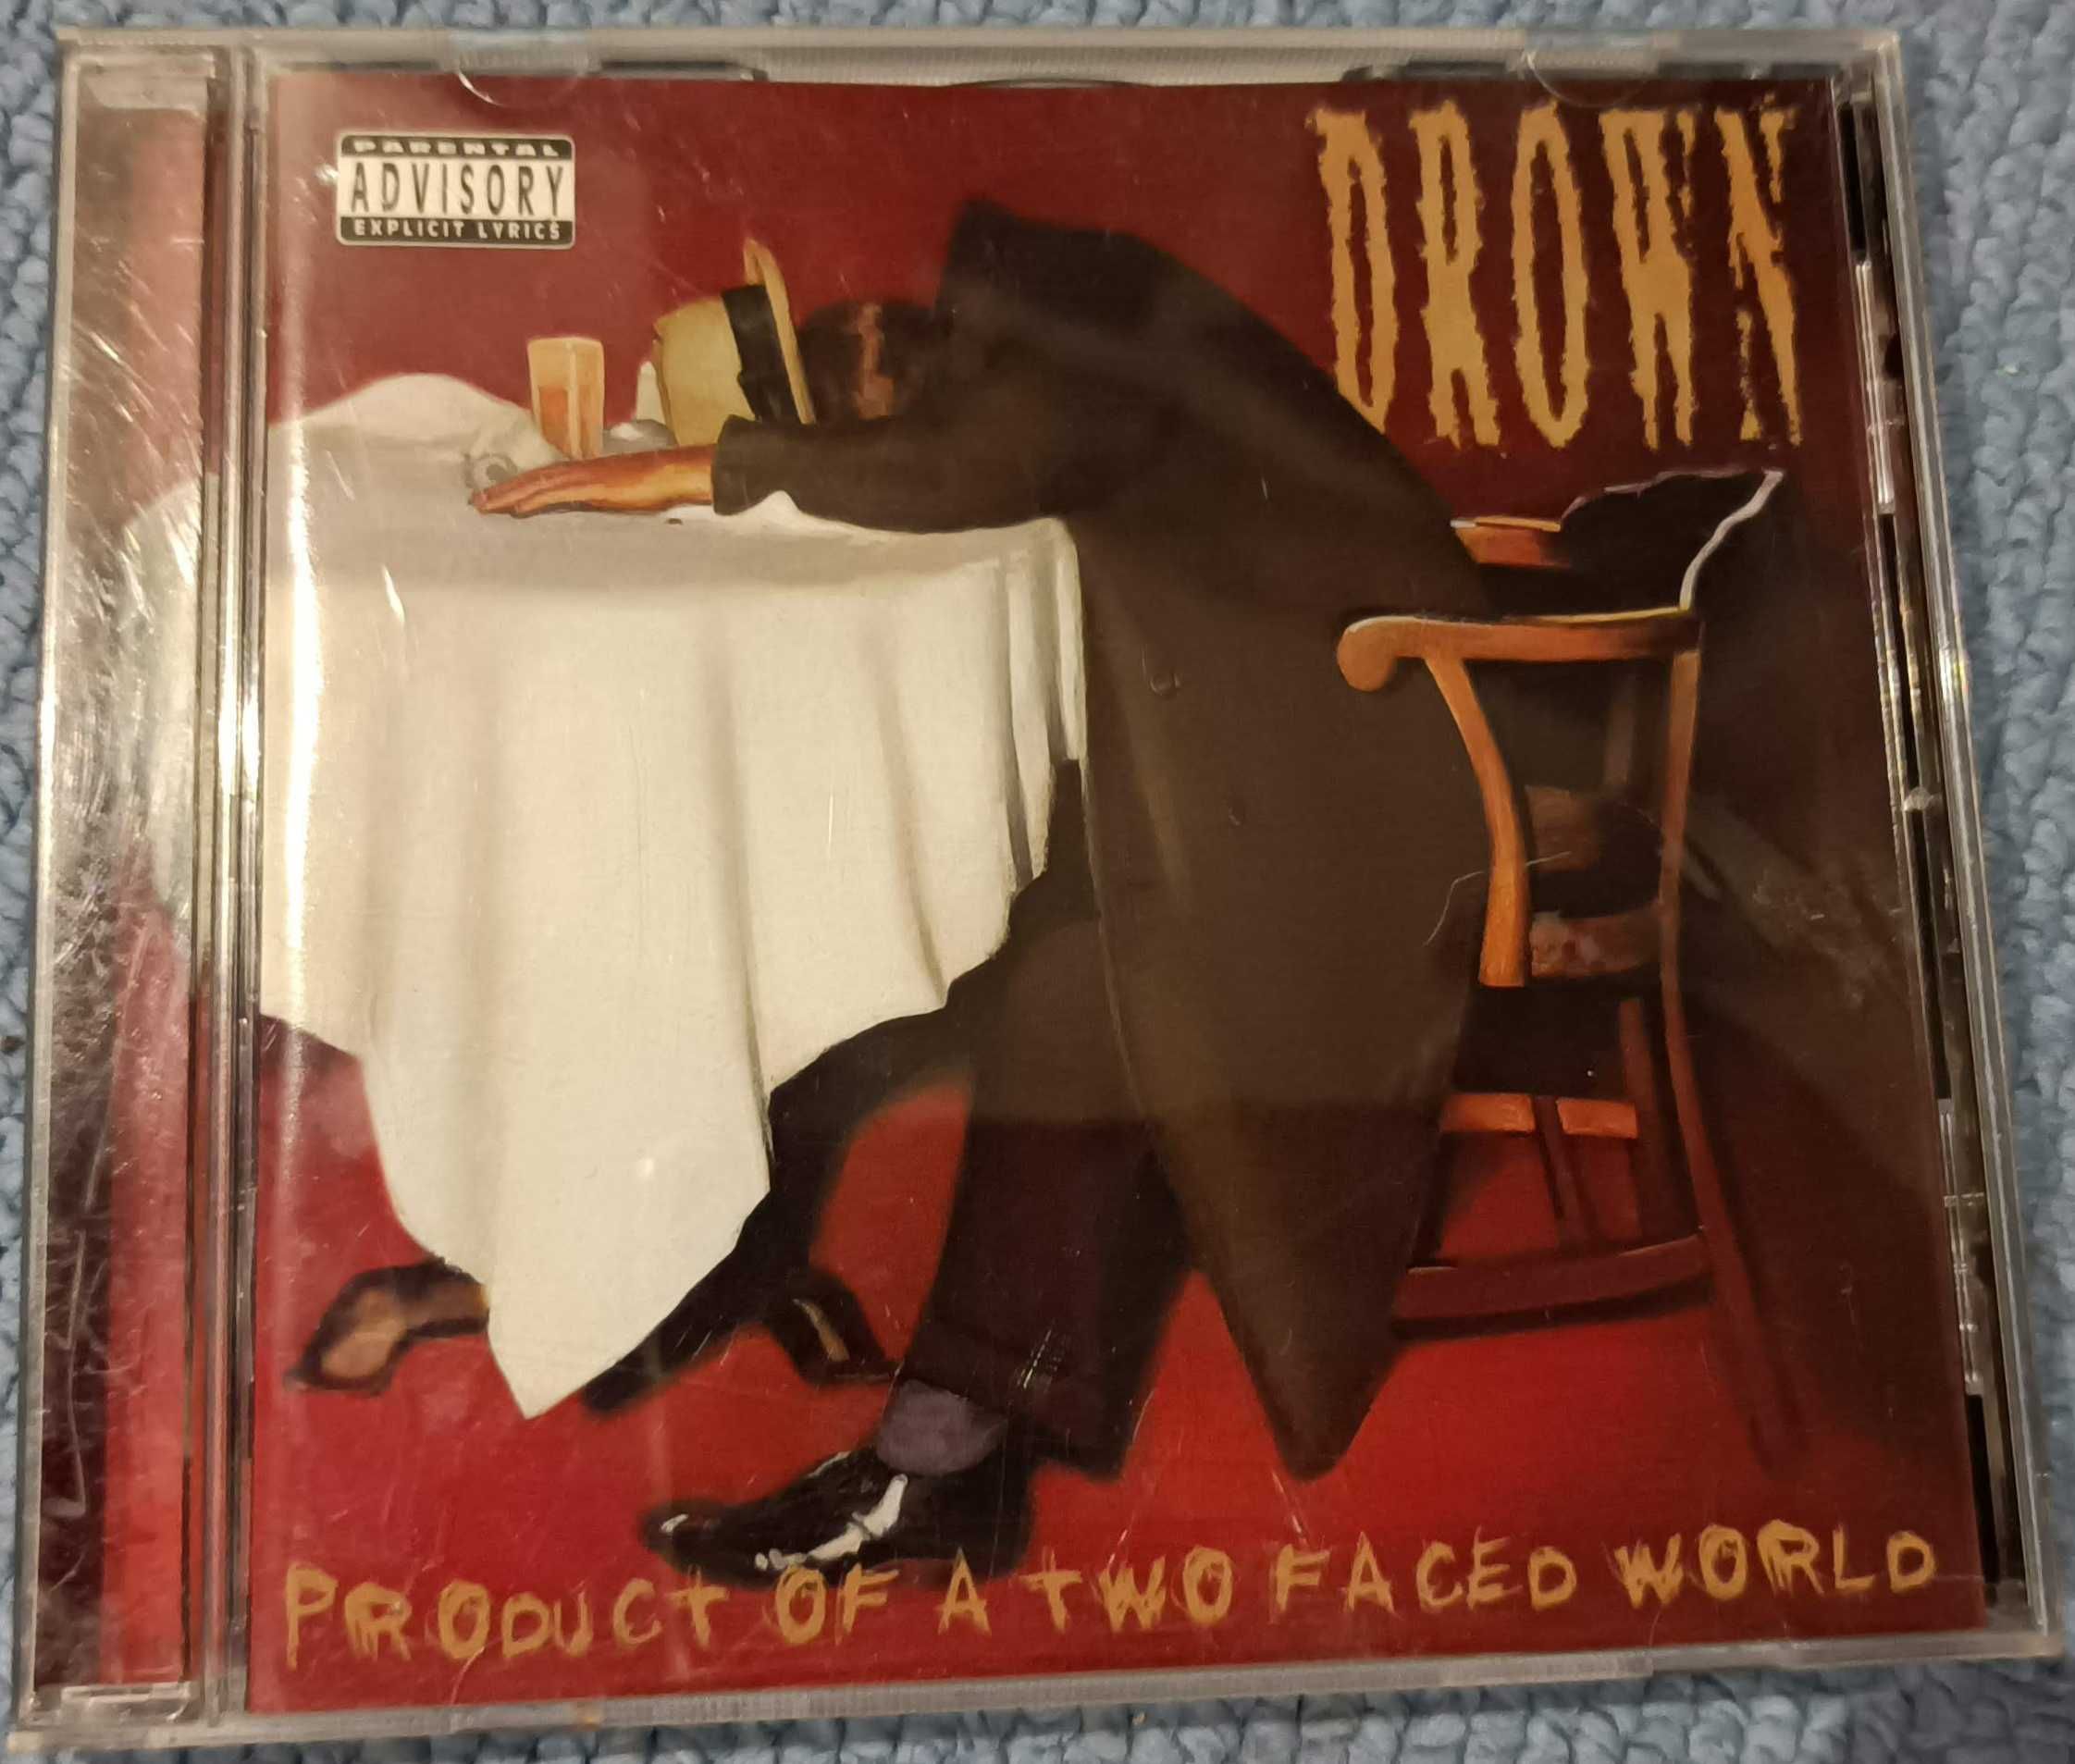 CD Drown "Product of a Two Faced World"